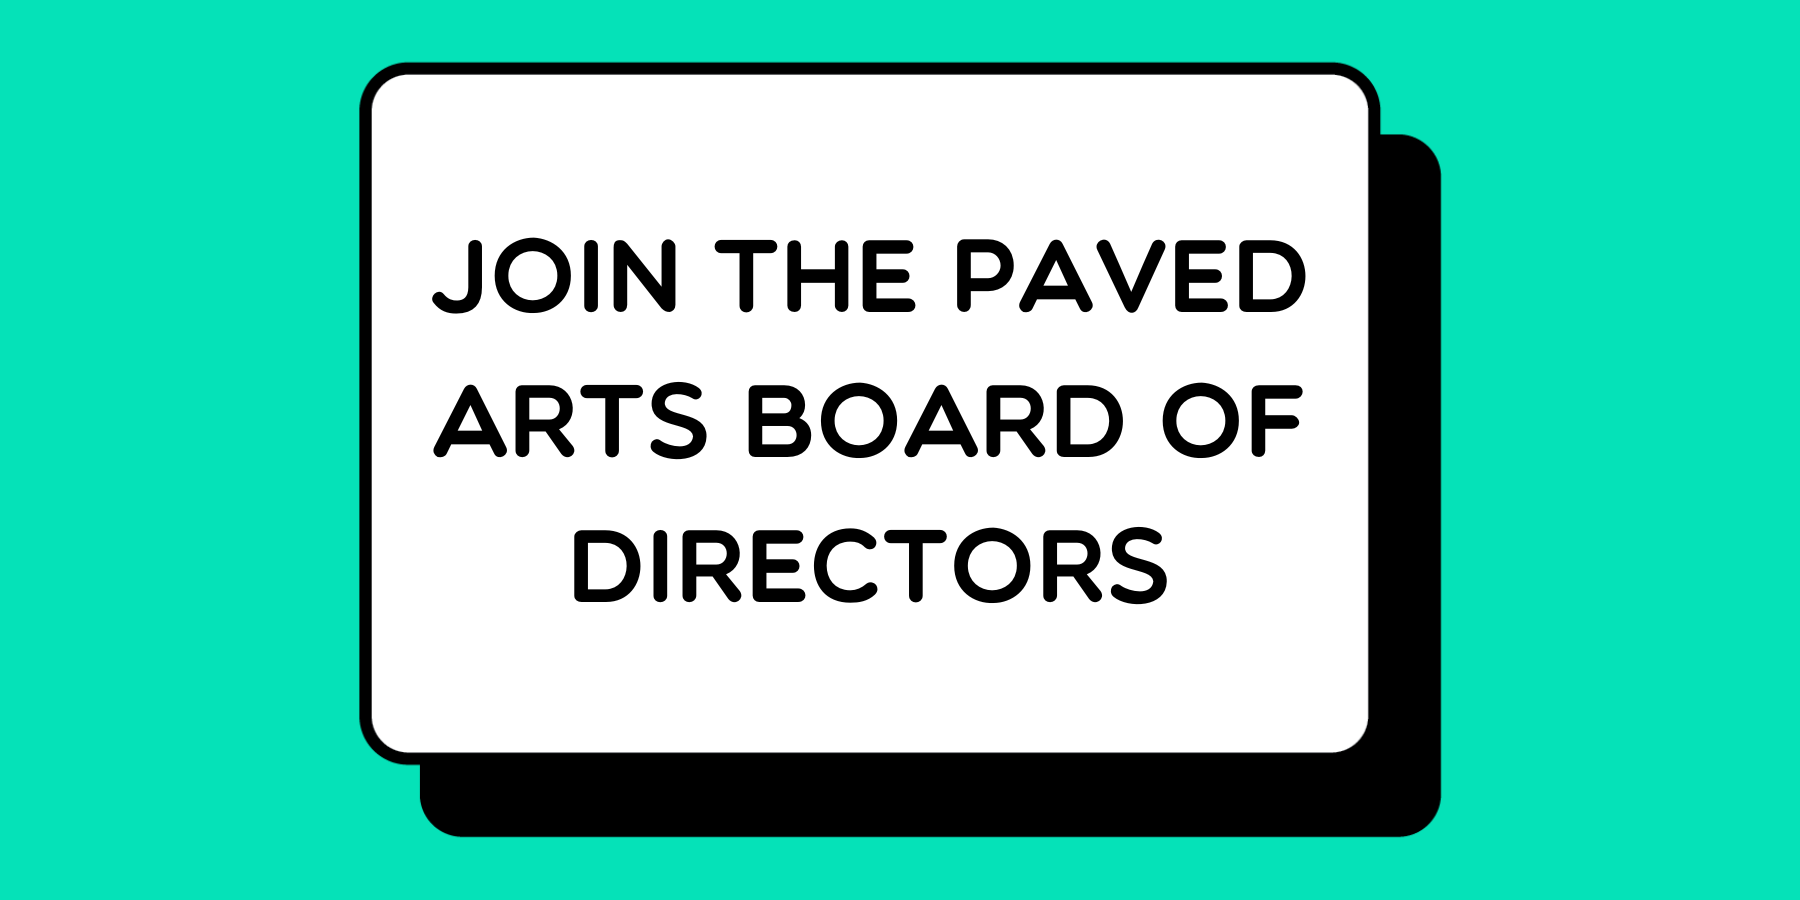 Join the PAVED Arts board of directors